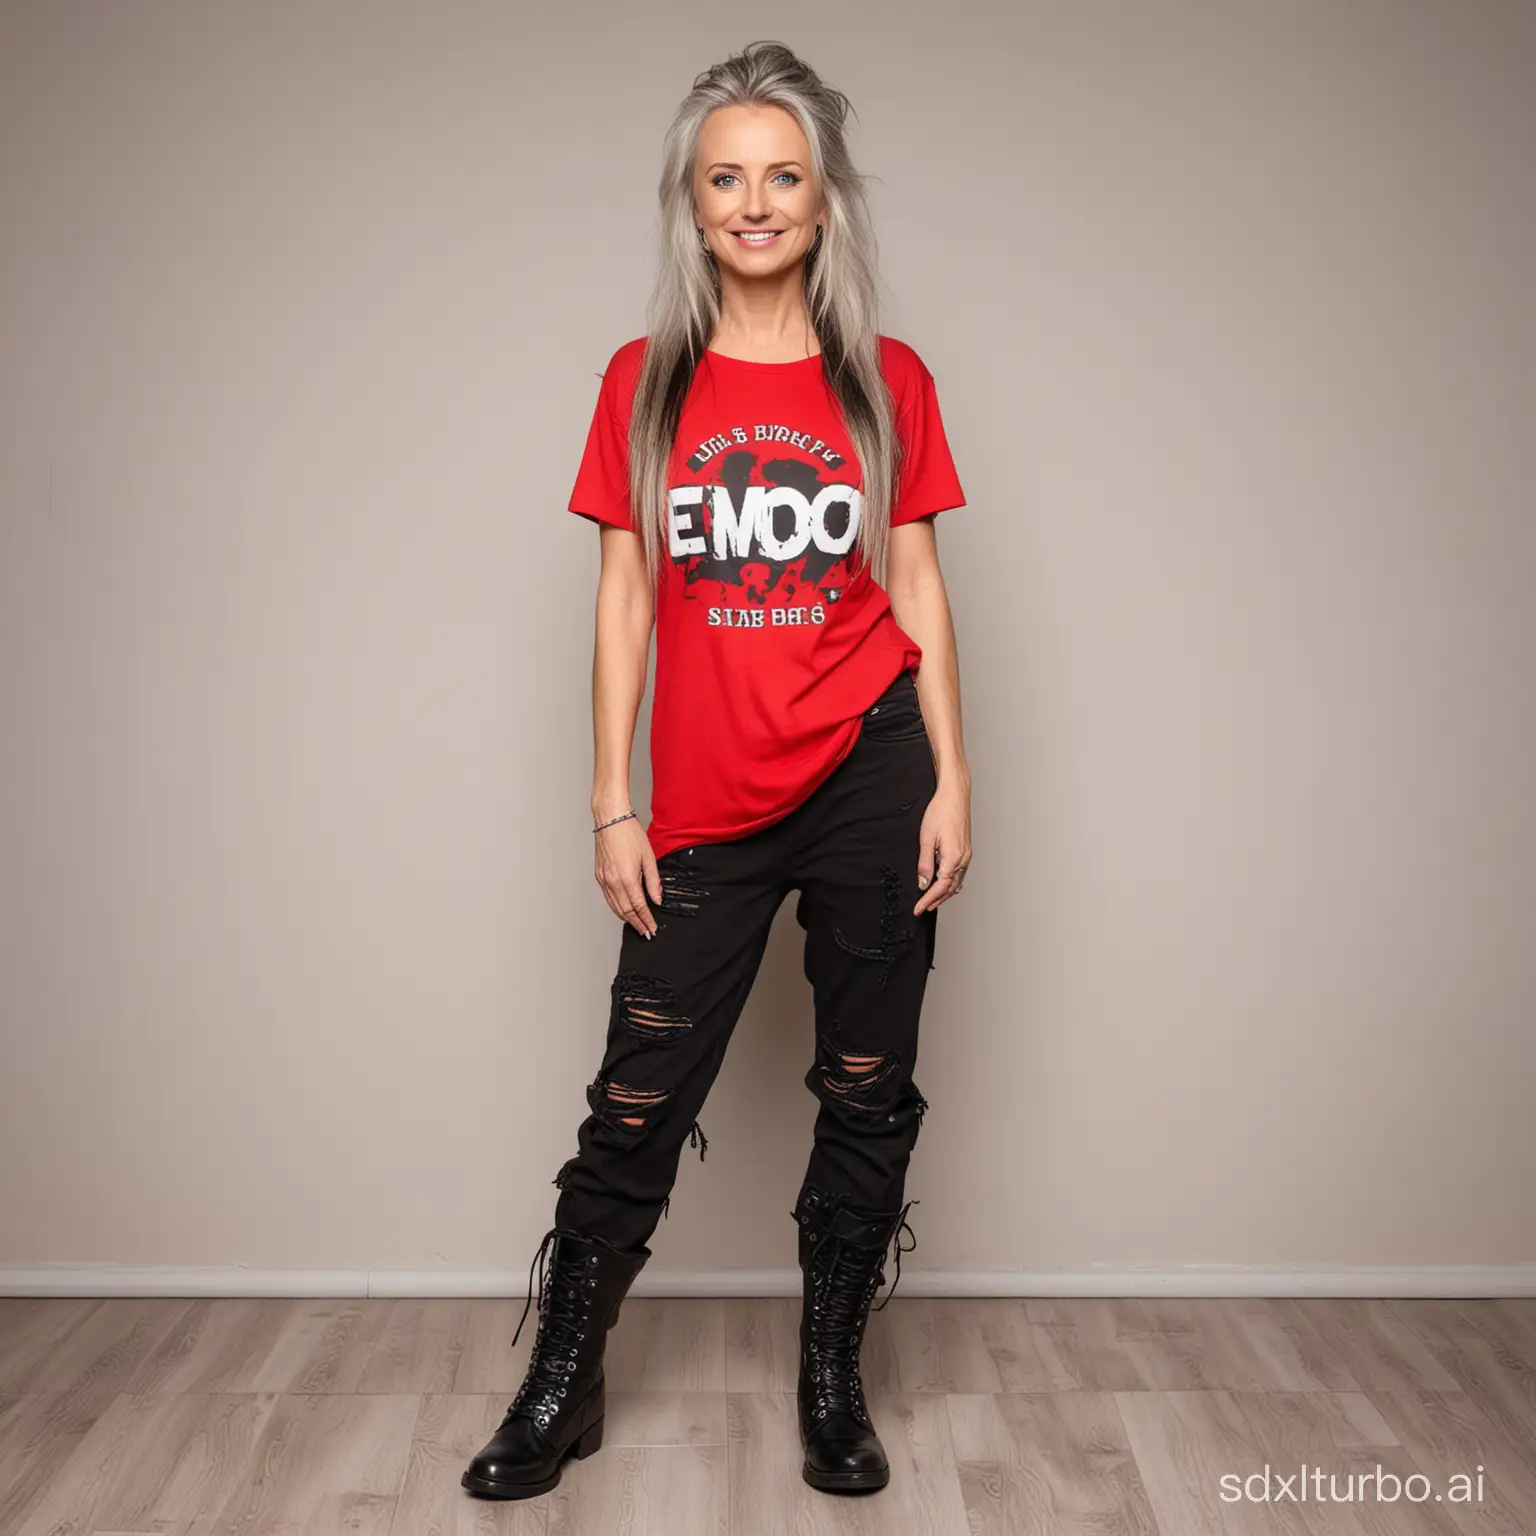 A cool Lithuanian woman 51 years old, blue eyes; she is wearing a long half up pulled hairstyle with long light beige and black locks  dressed in Emo clothes: a red T-shirt and a black ripped pants wearing black short ankle boots, with a smile, in a full body standing photo.